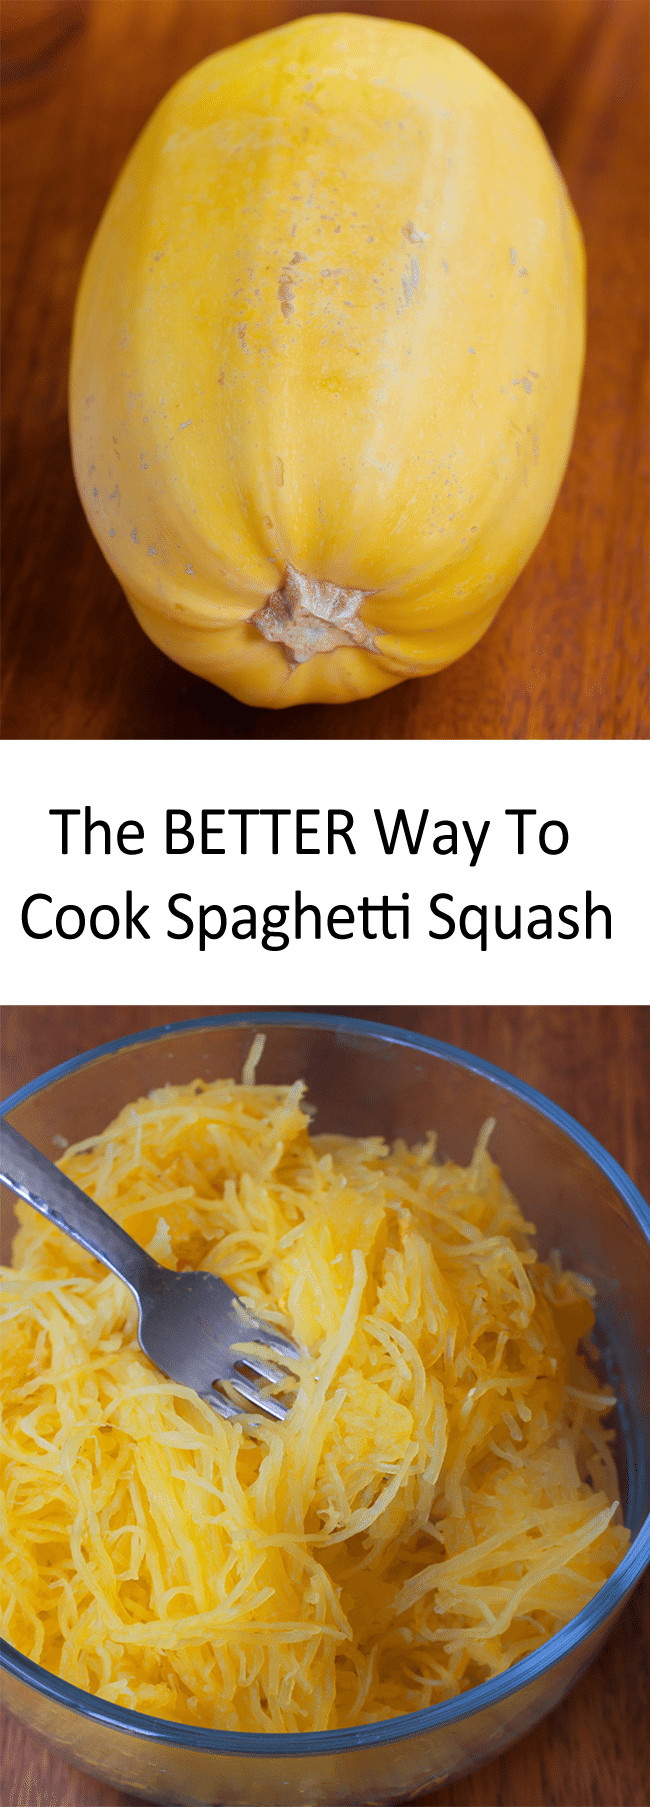 Spaghetti In The Microwave
 How To Cook Spaghetti Squash